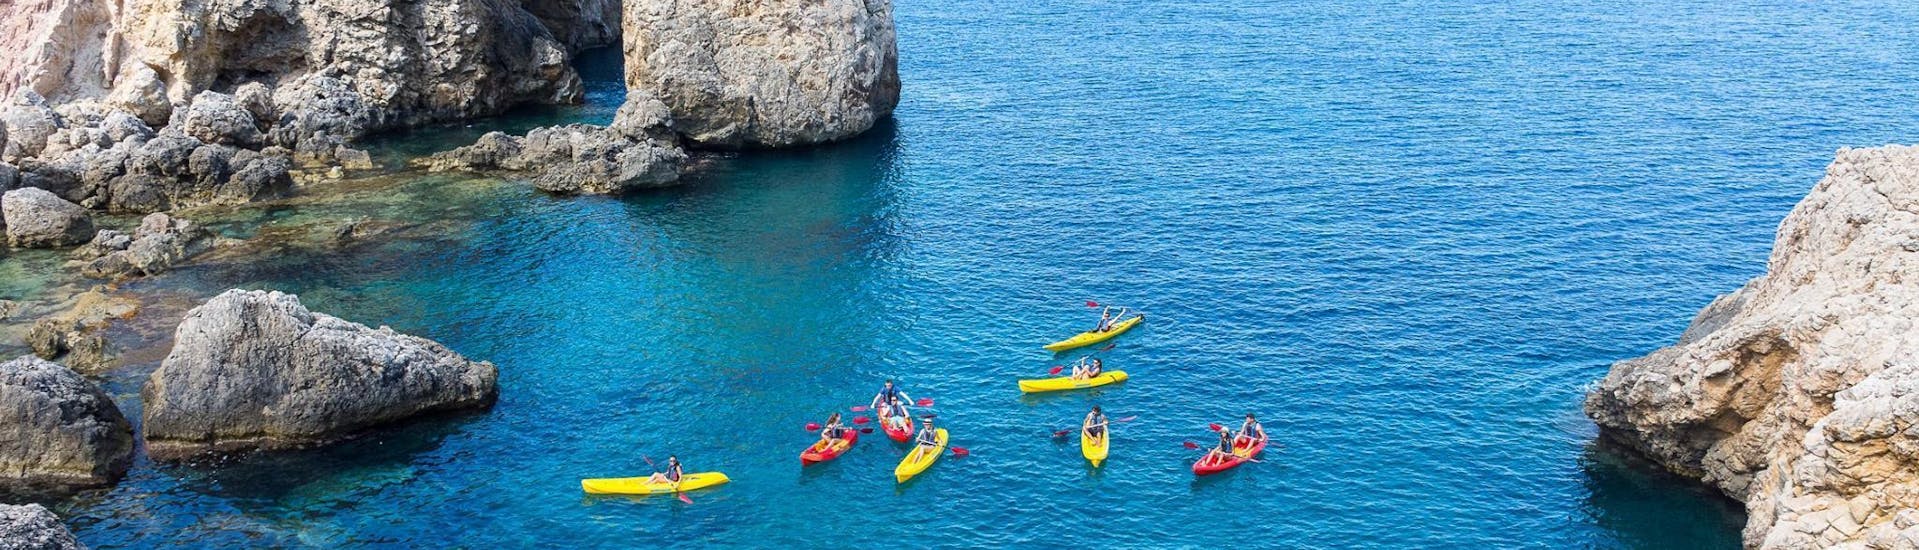 A group of participants kayaking in the Malgrats Islands with rentals offered by ZOEA Mallorca.